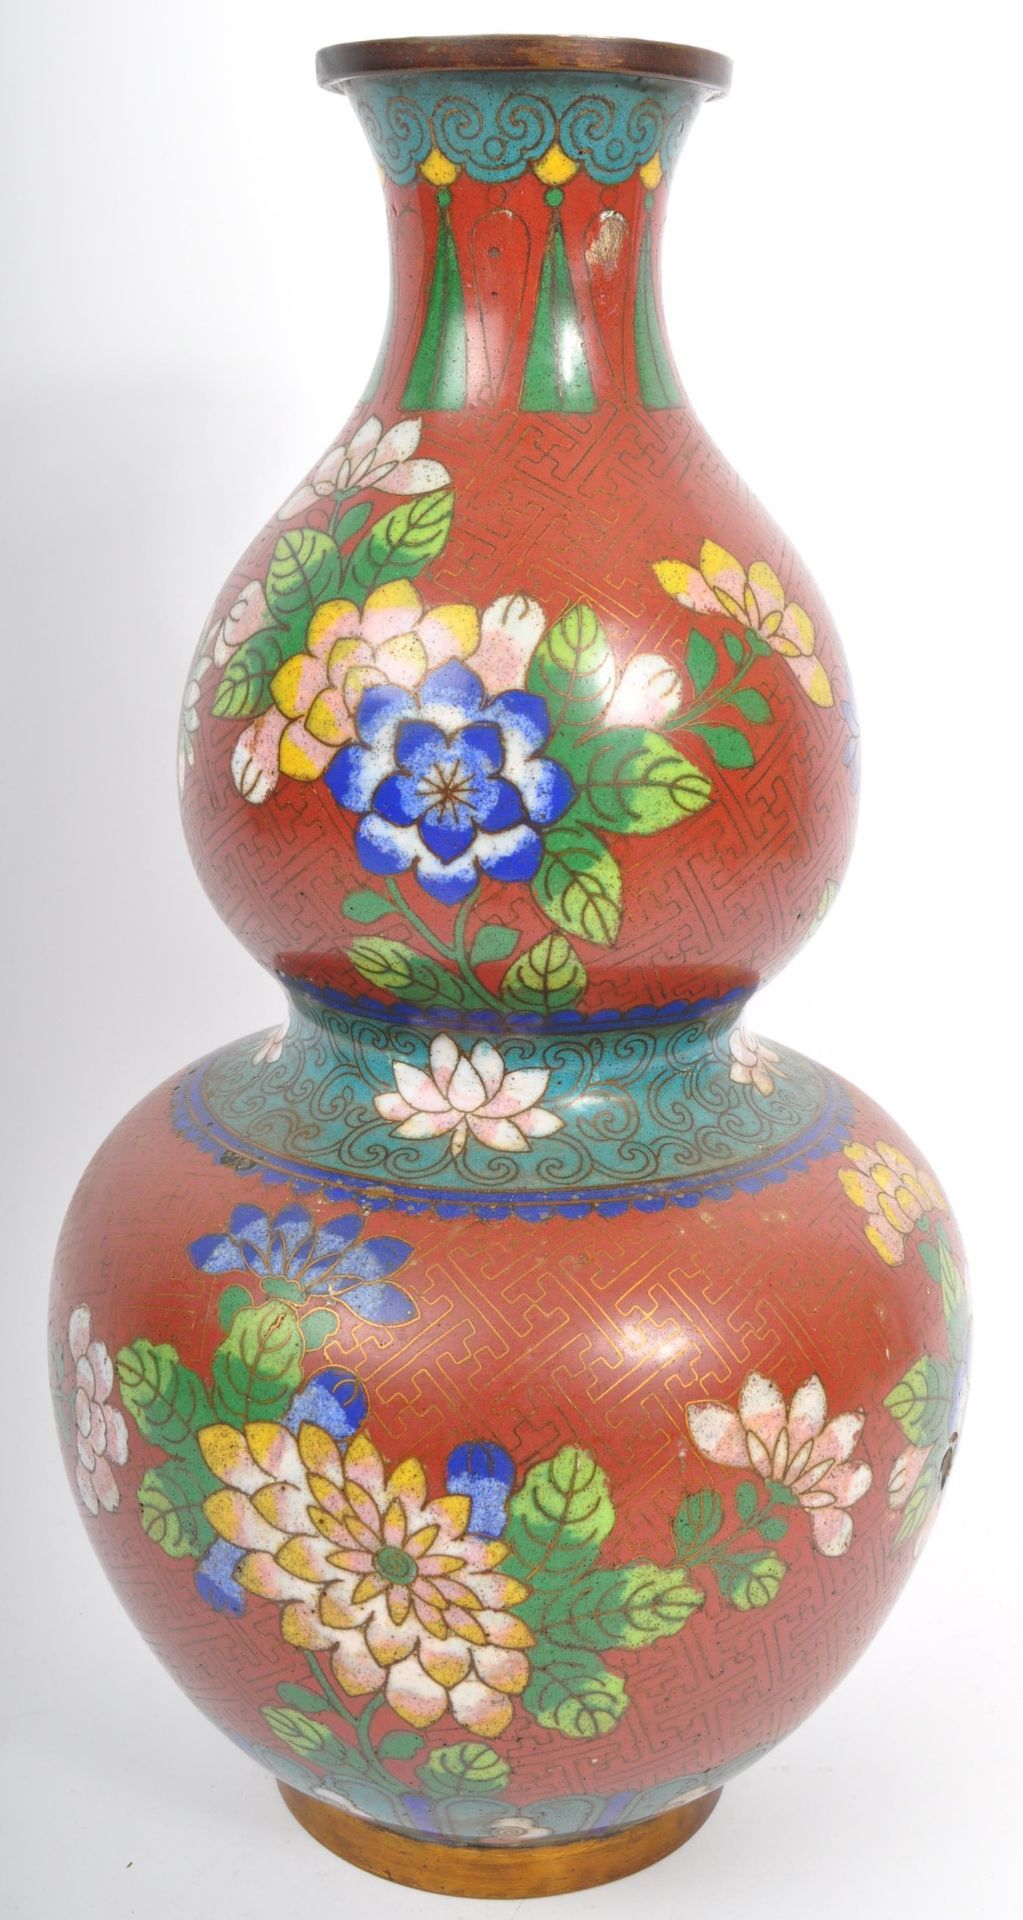 EARLY 20TH CENTURY CHINESE ORIENTAL CLOISONNE DUAL GOURD VASE